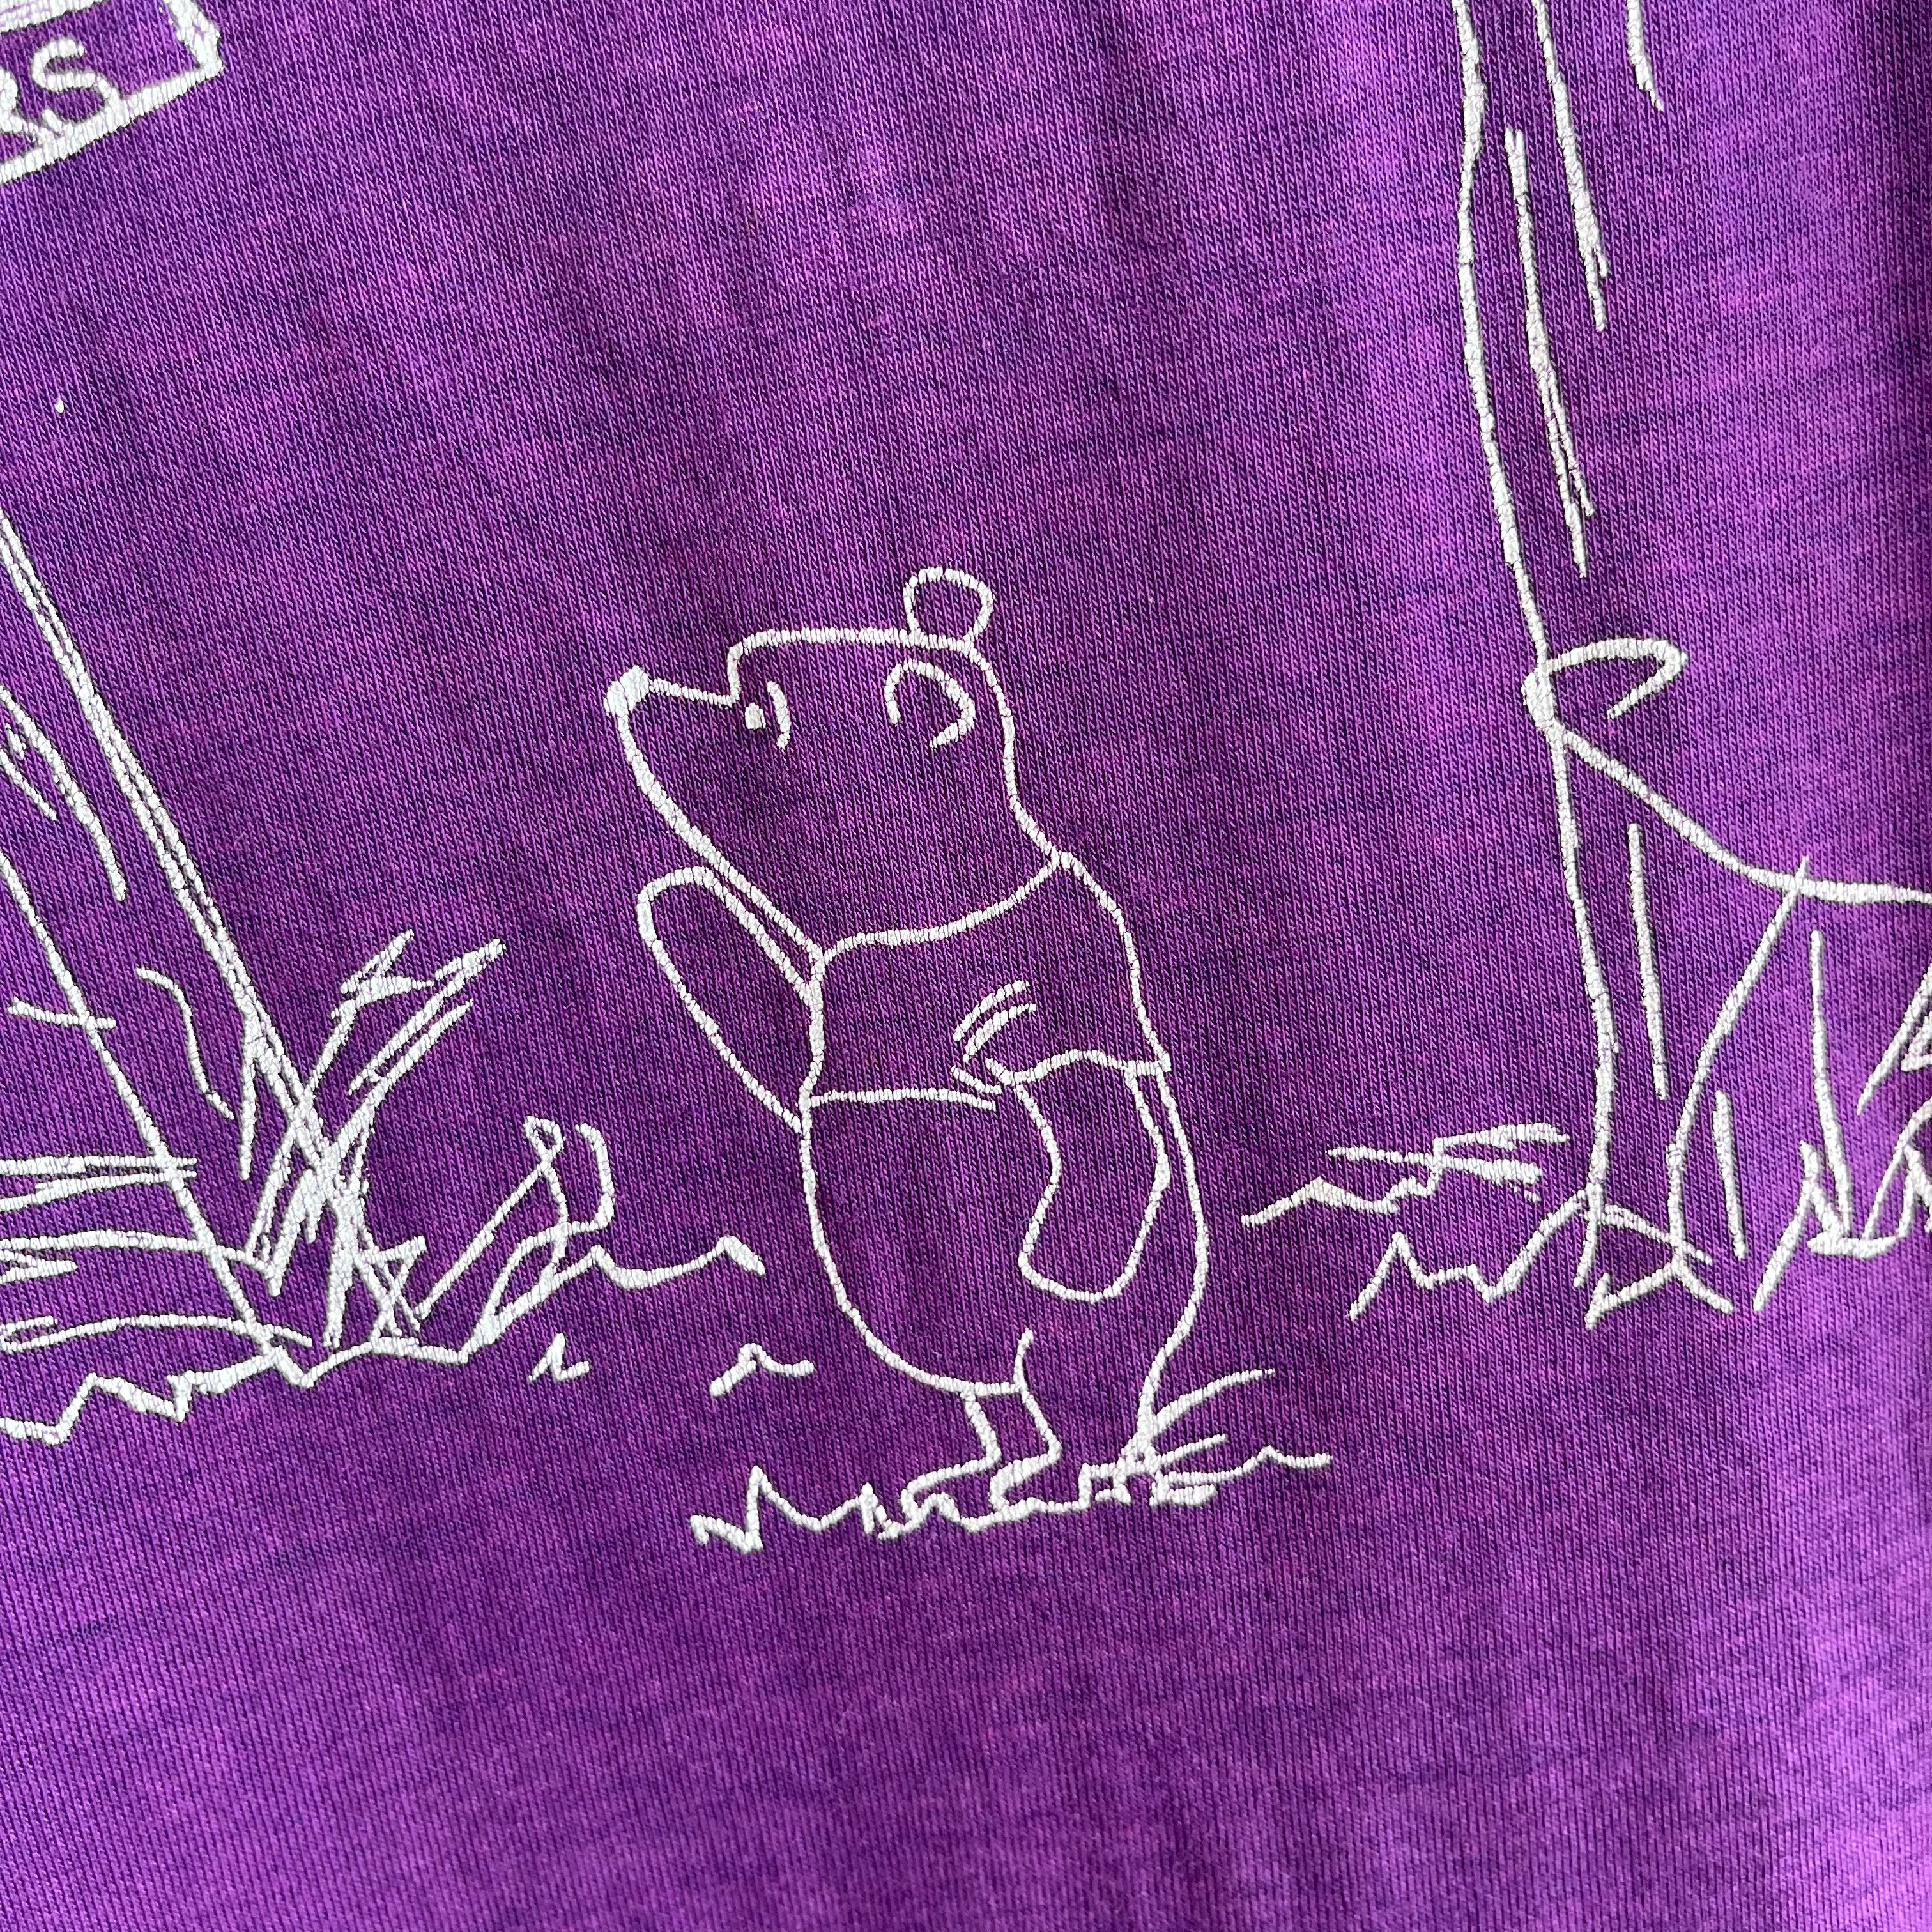 1984 Freshperson Conference with Pooh Bear Smaller T-Shirt